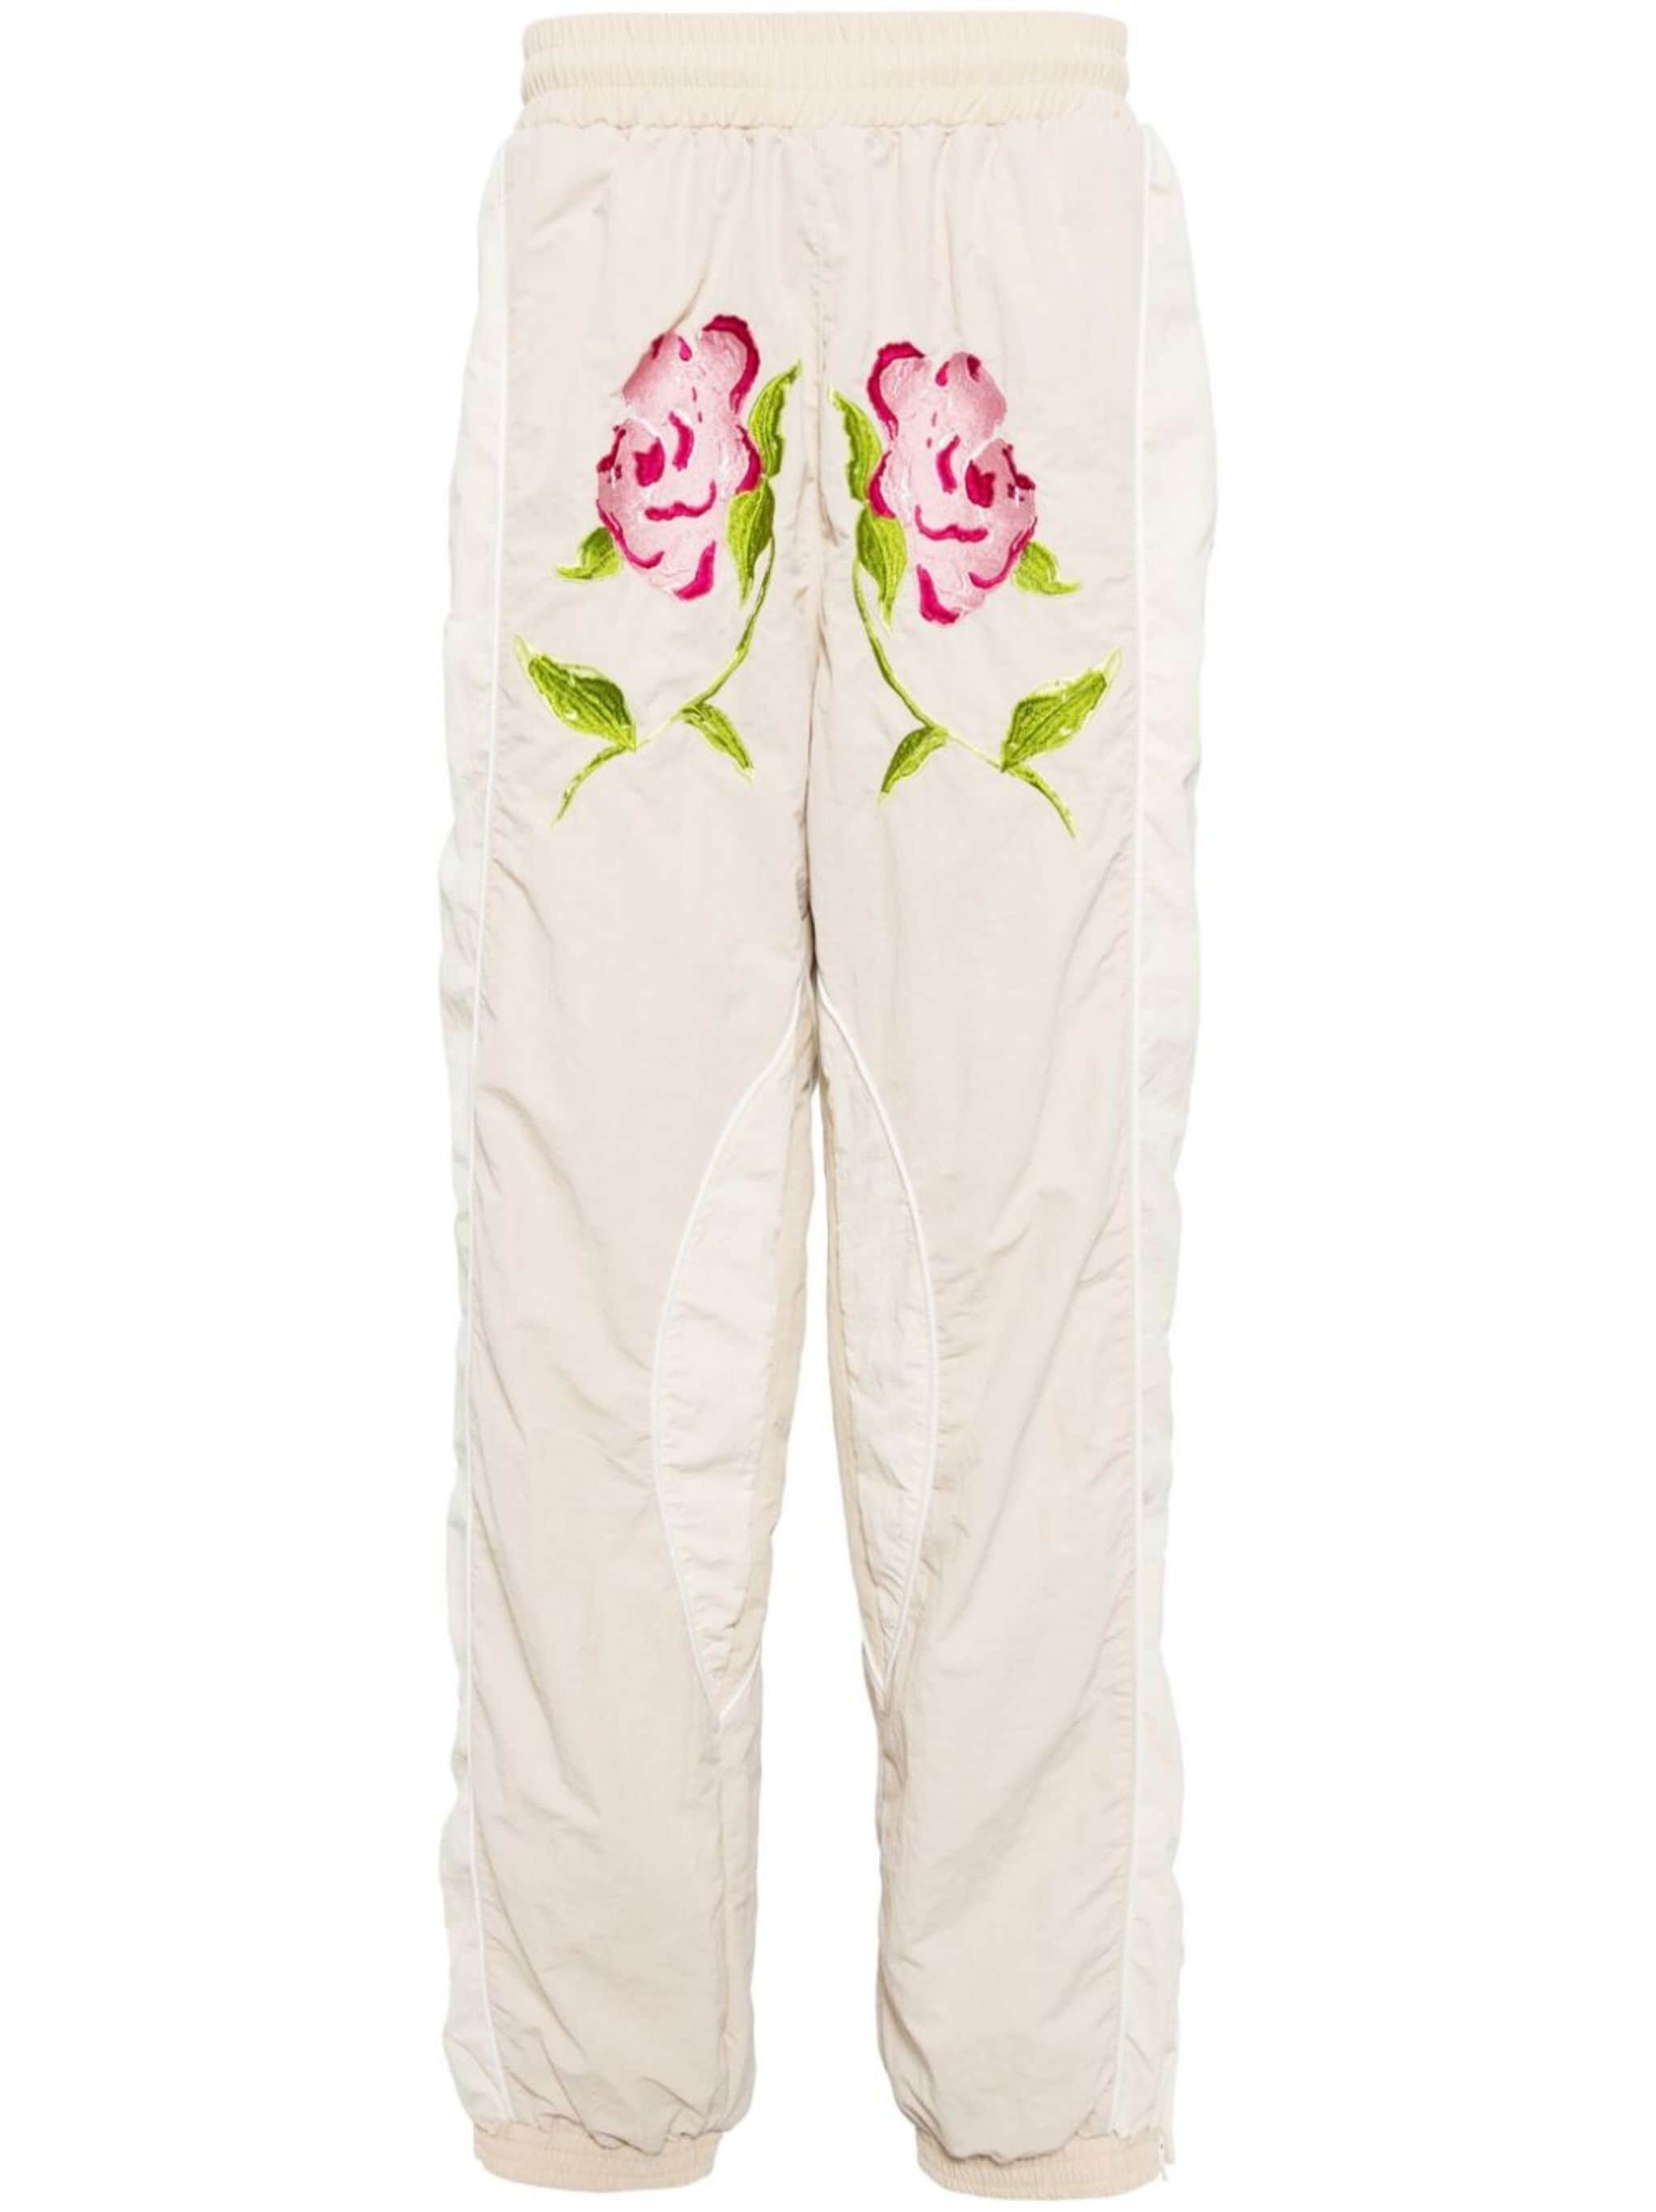 embroidered-motif track pants - 1